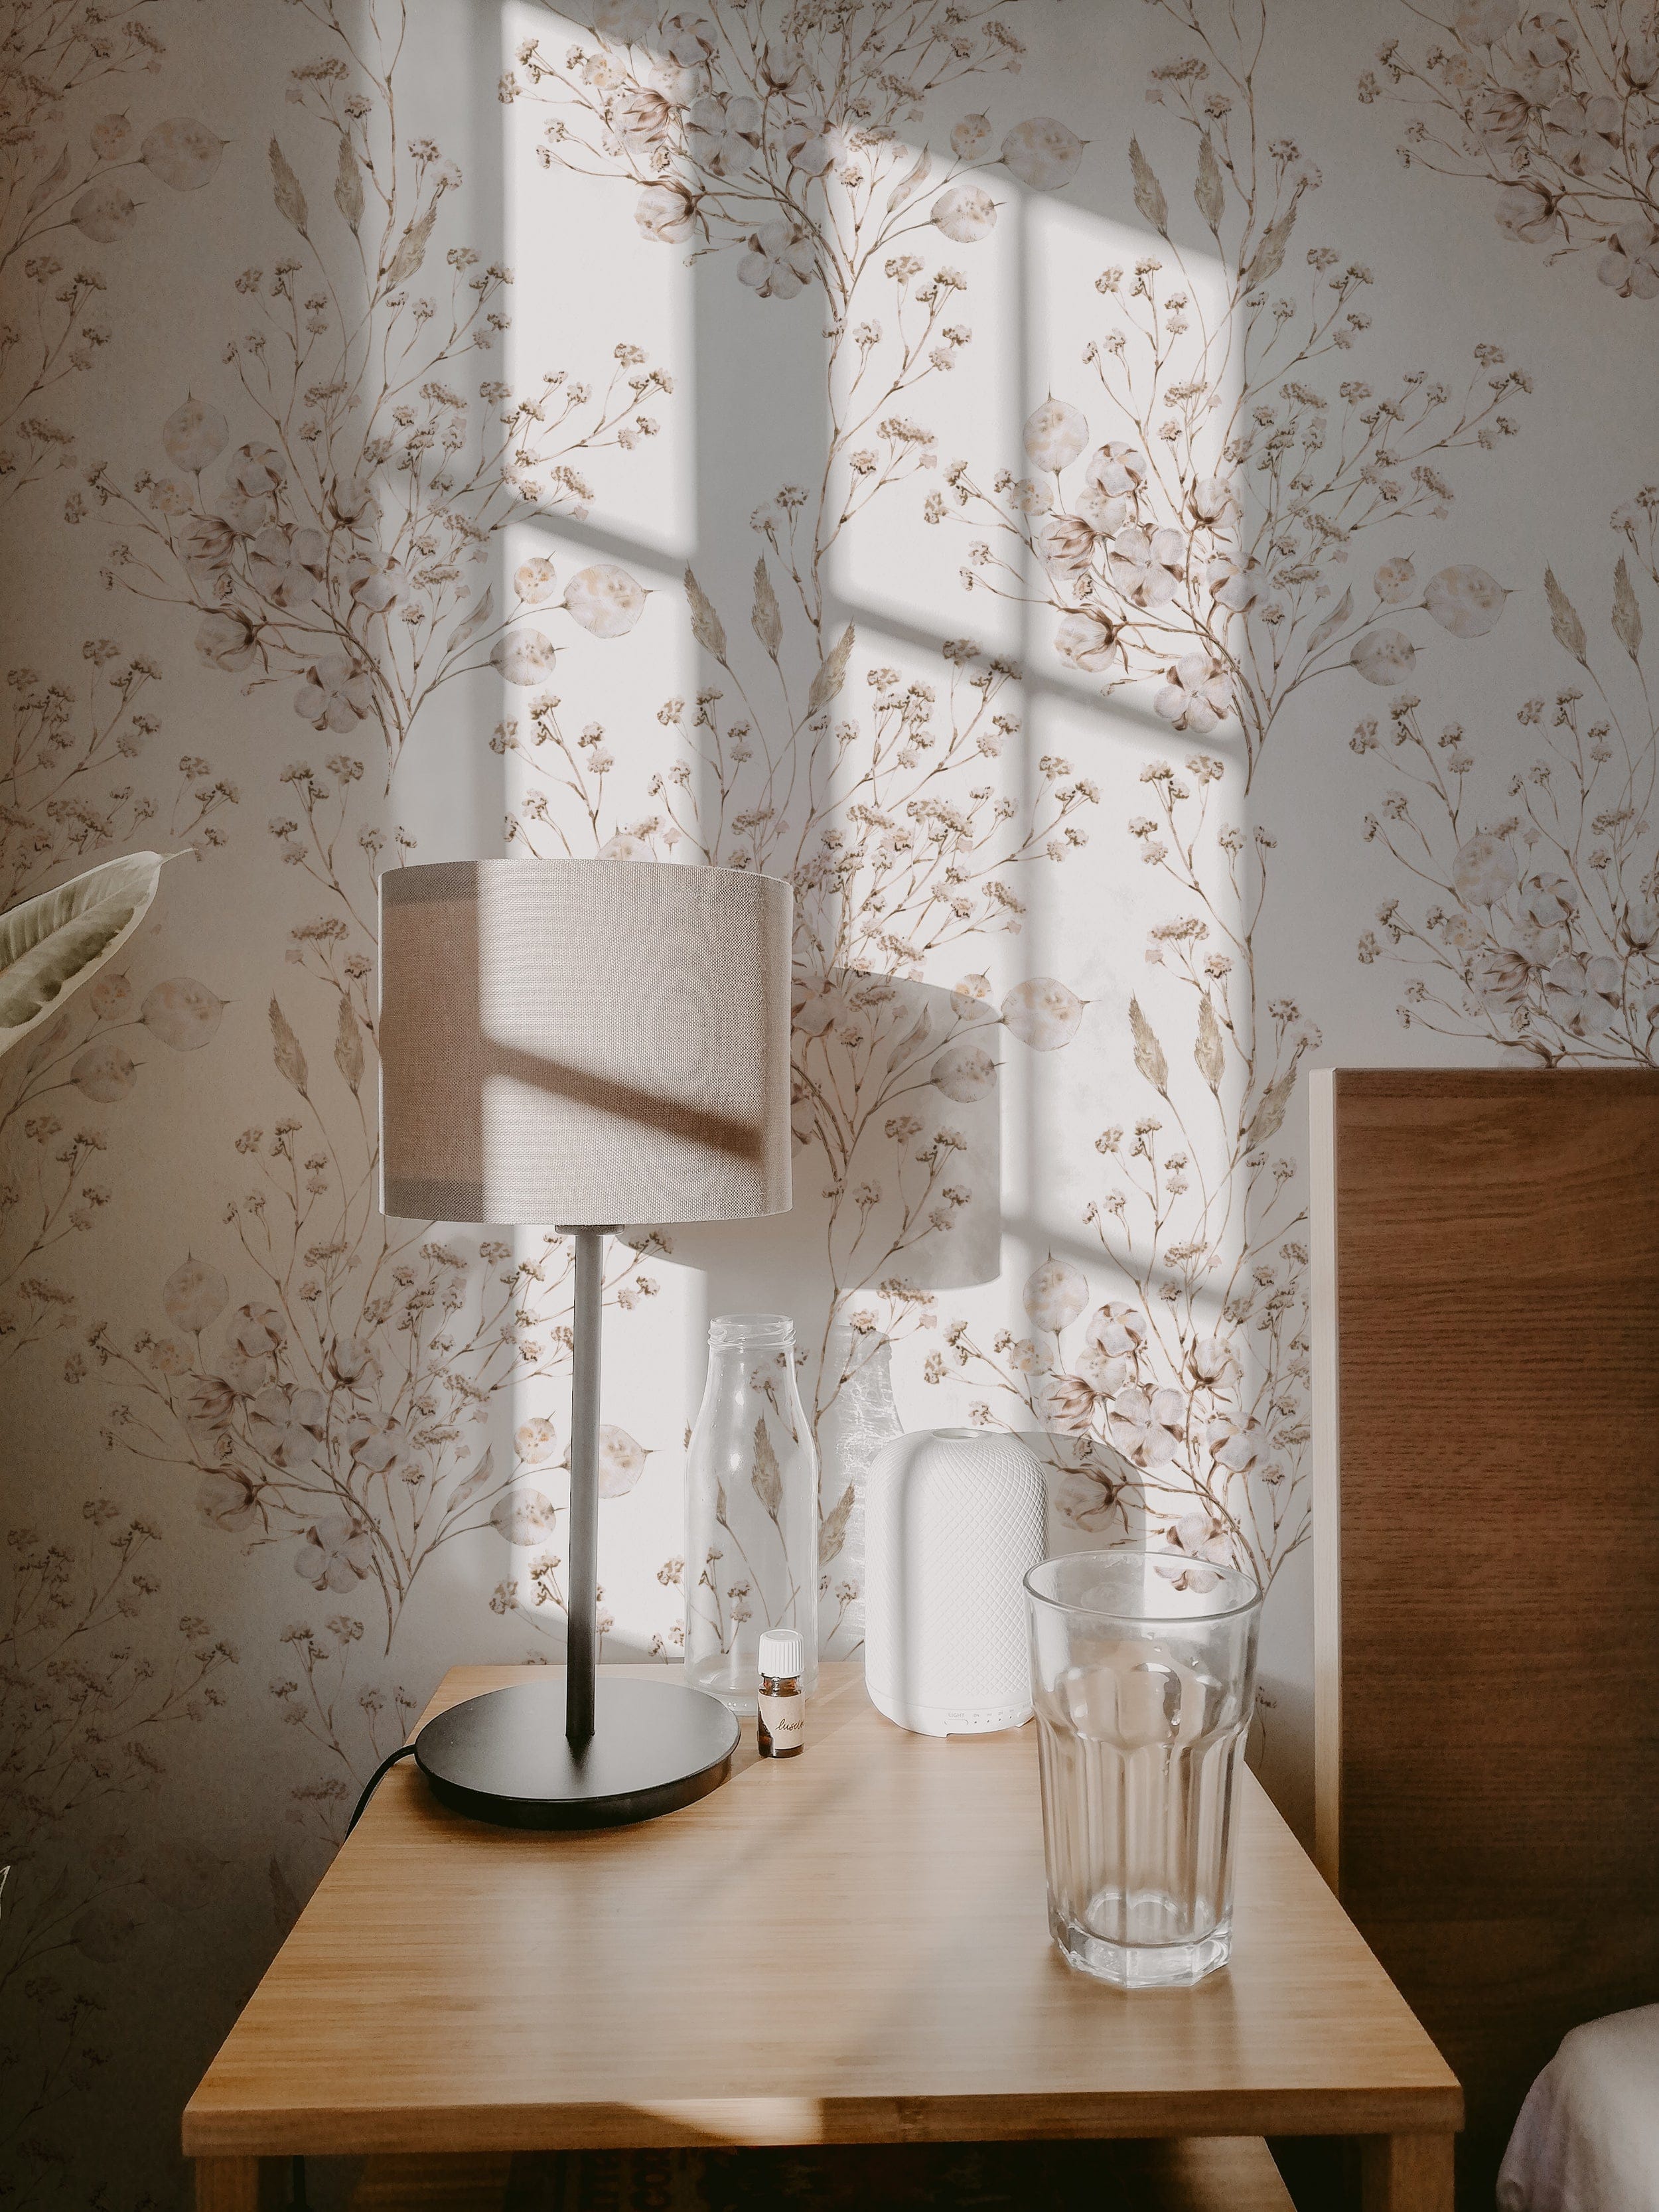 A cozy corner illuminated by sunlight filtering through sheer curtains showcases the Boho Winter Floral Wallpaper, complementing the warm and inviting reading space.